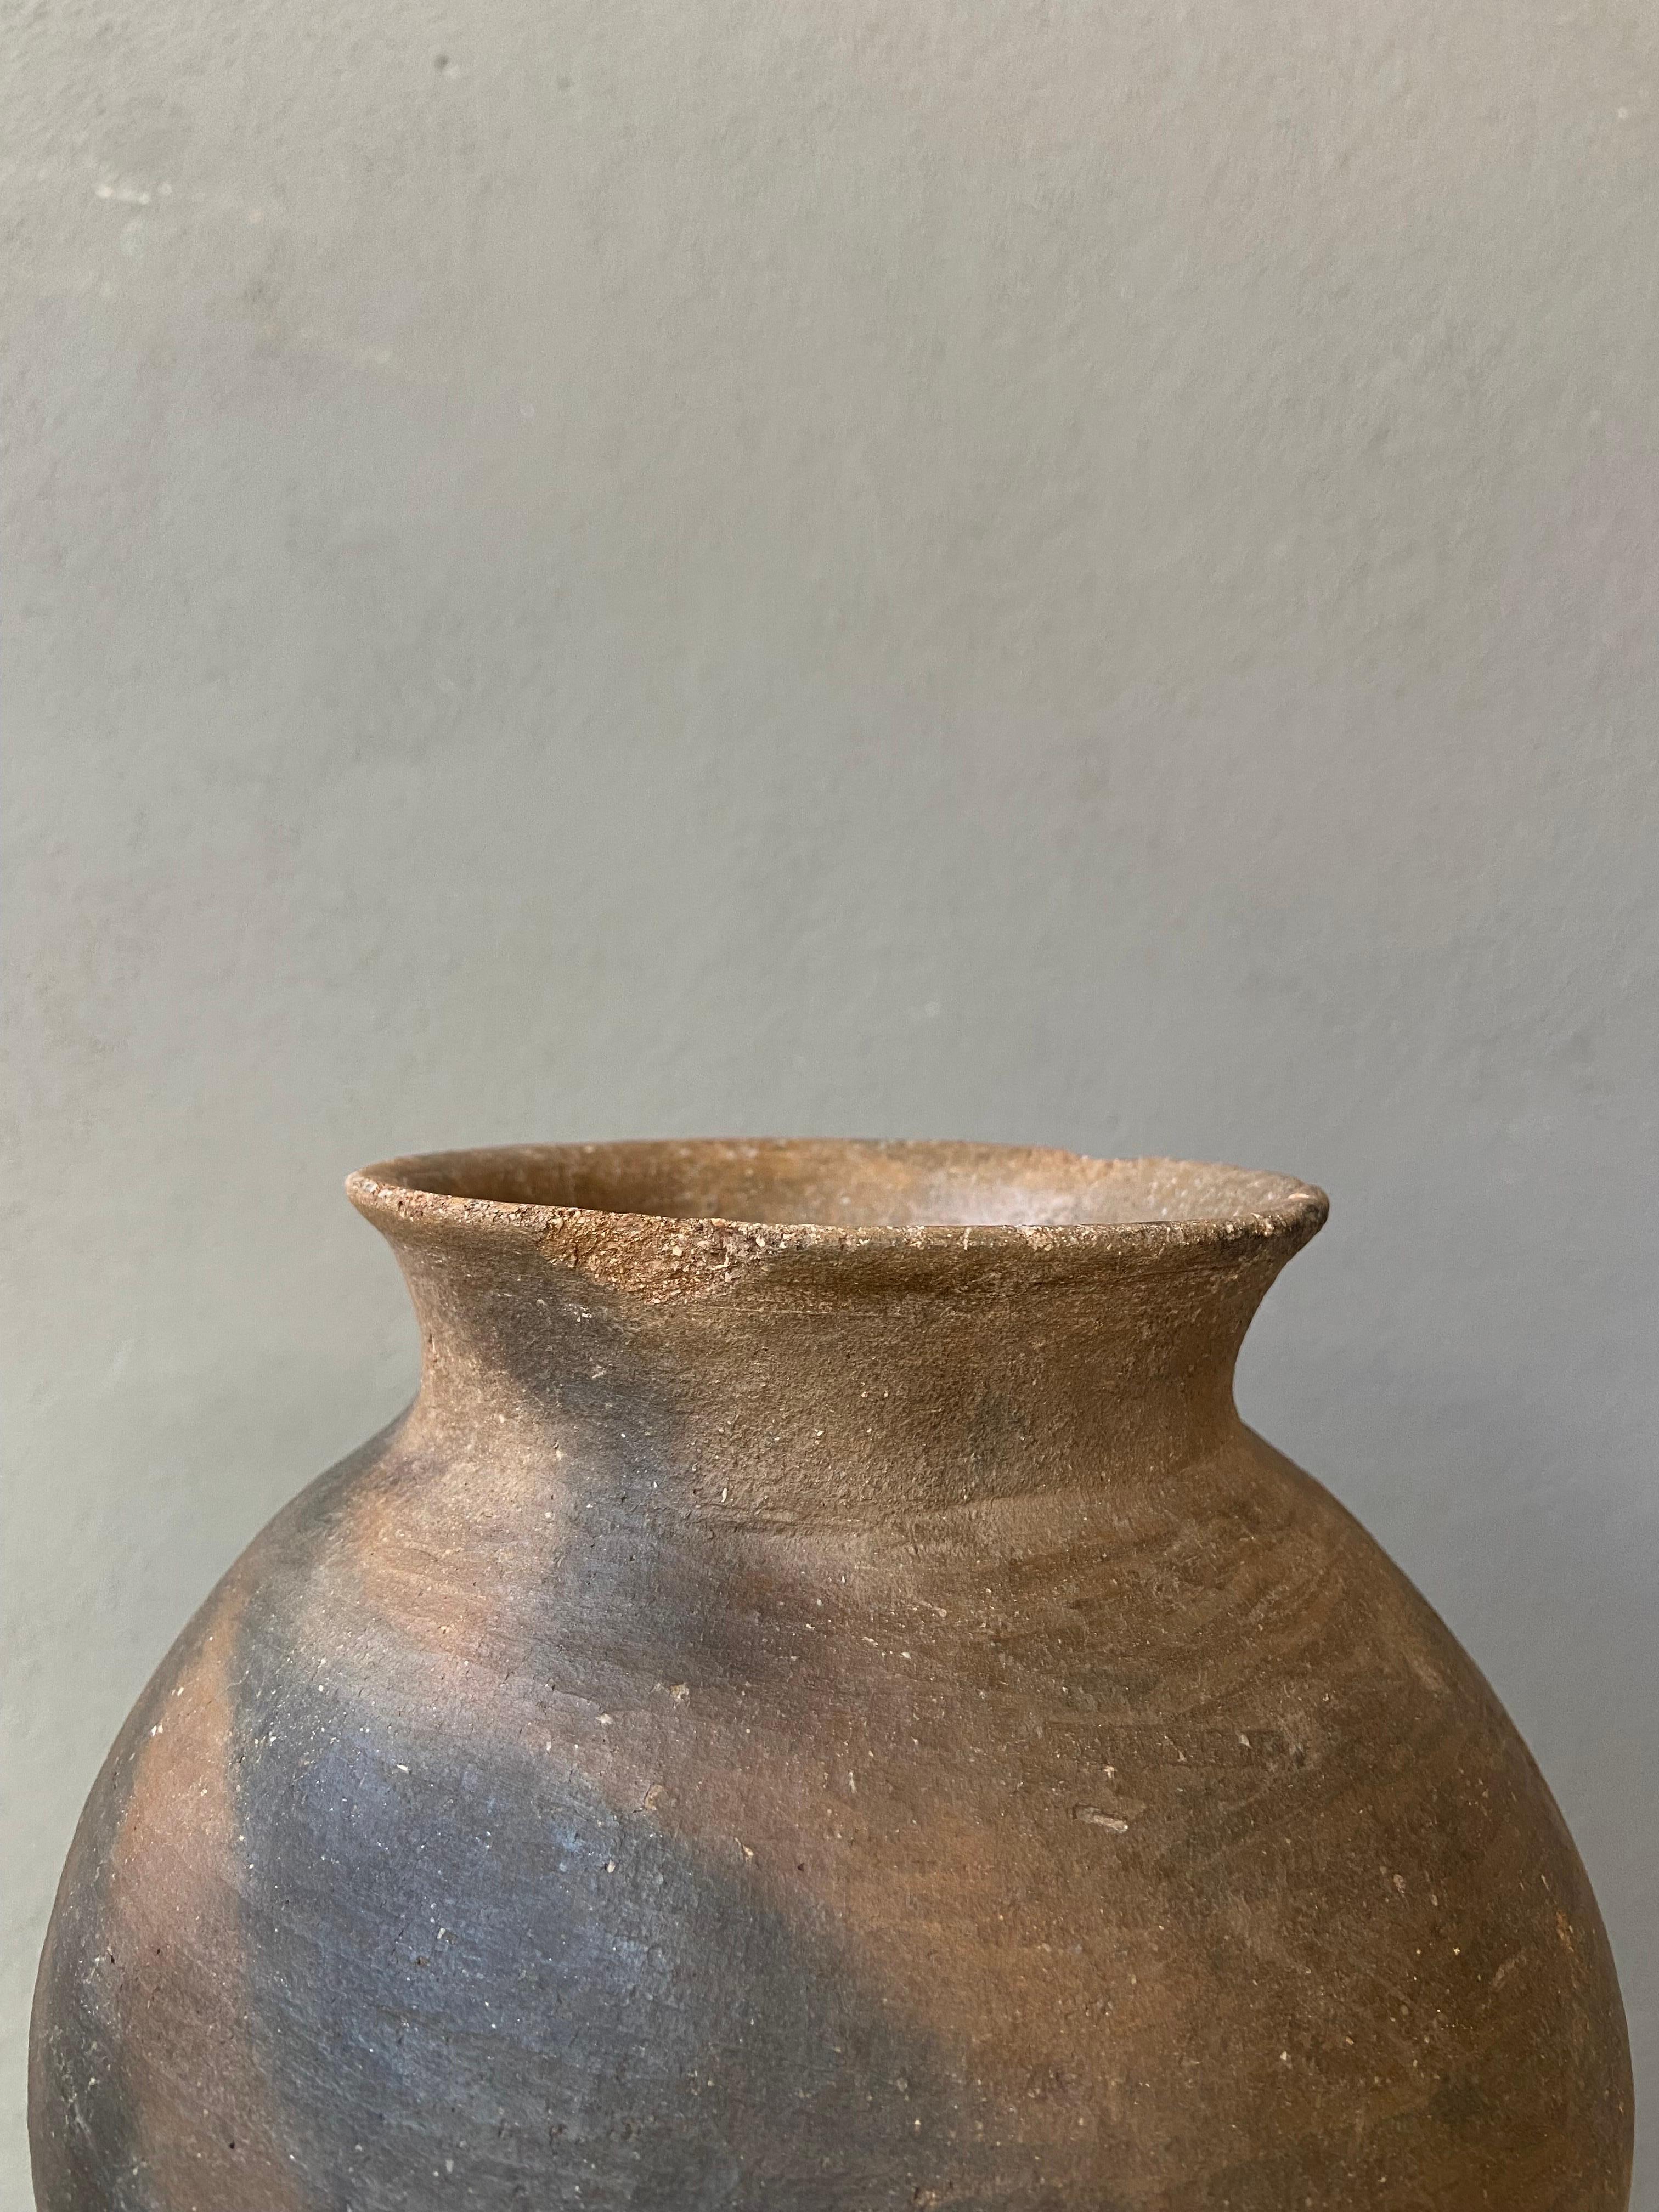 Mexican Terracotta Cooking Pot From The Mixteca Region of Oaxaca, Mexico